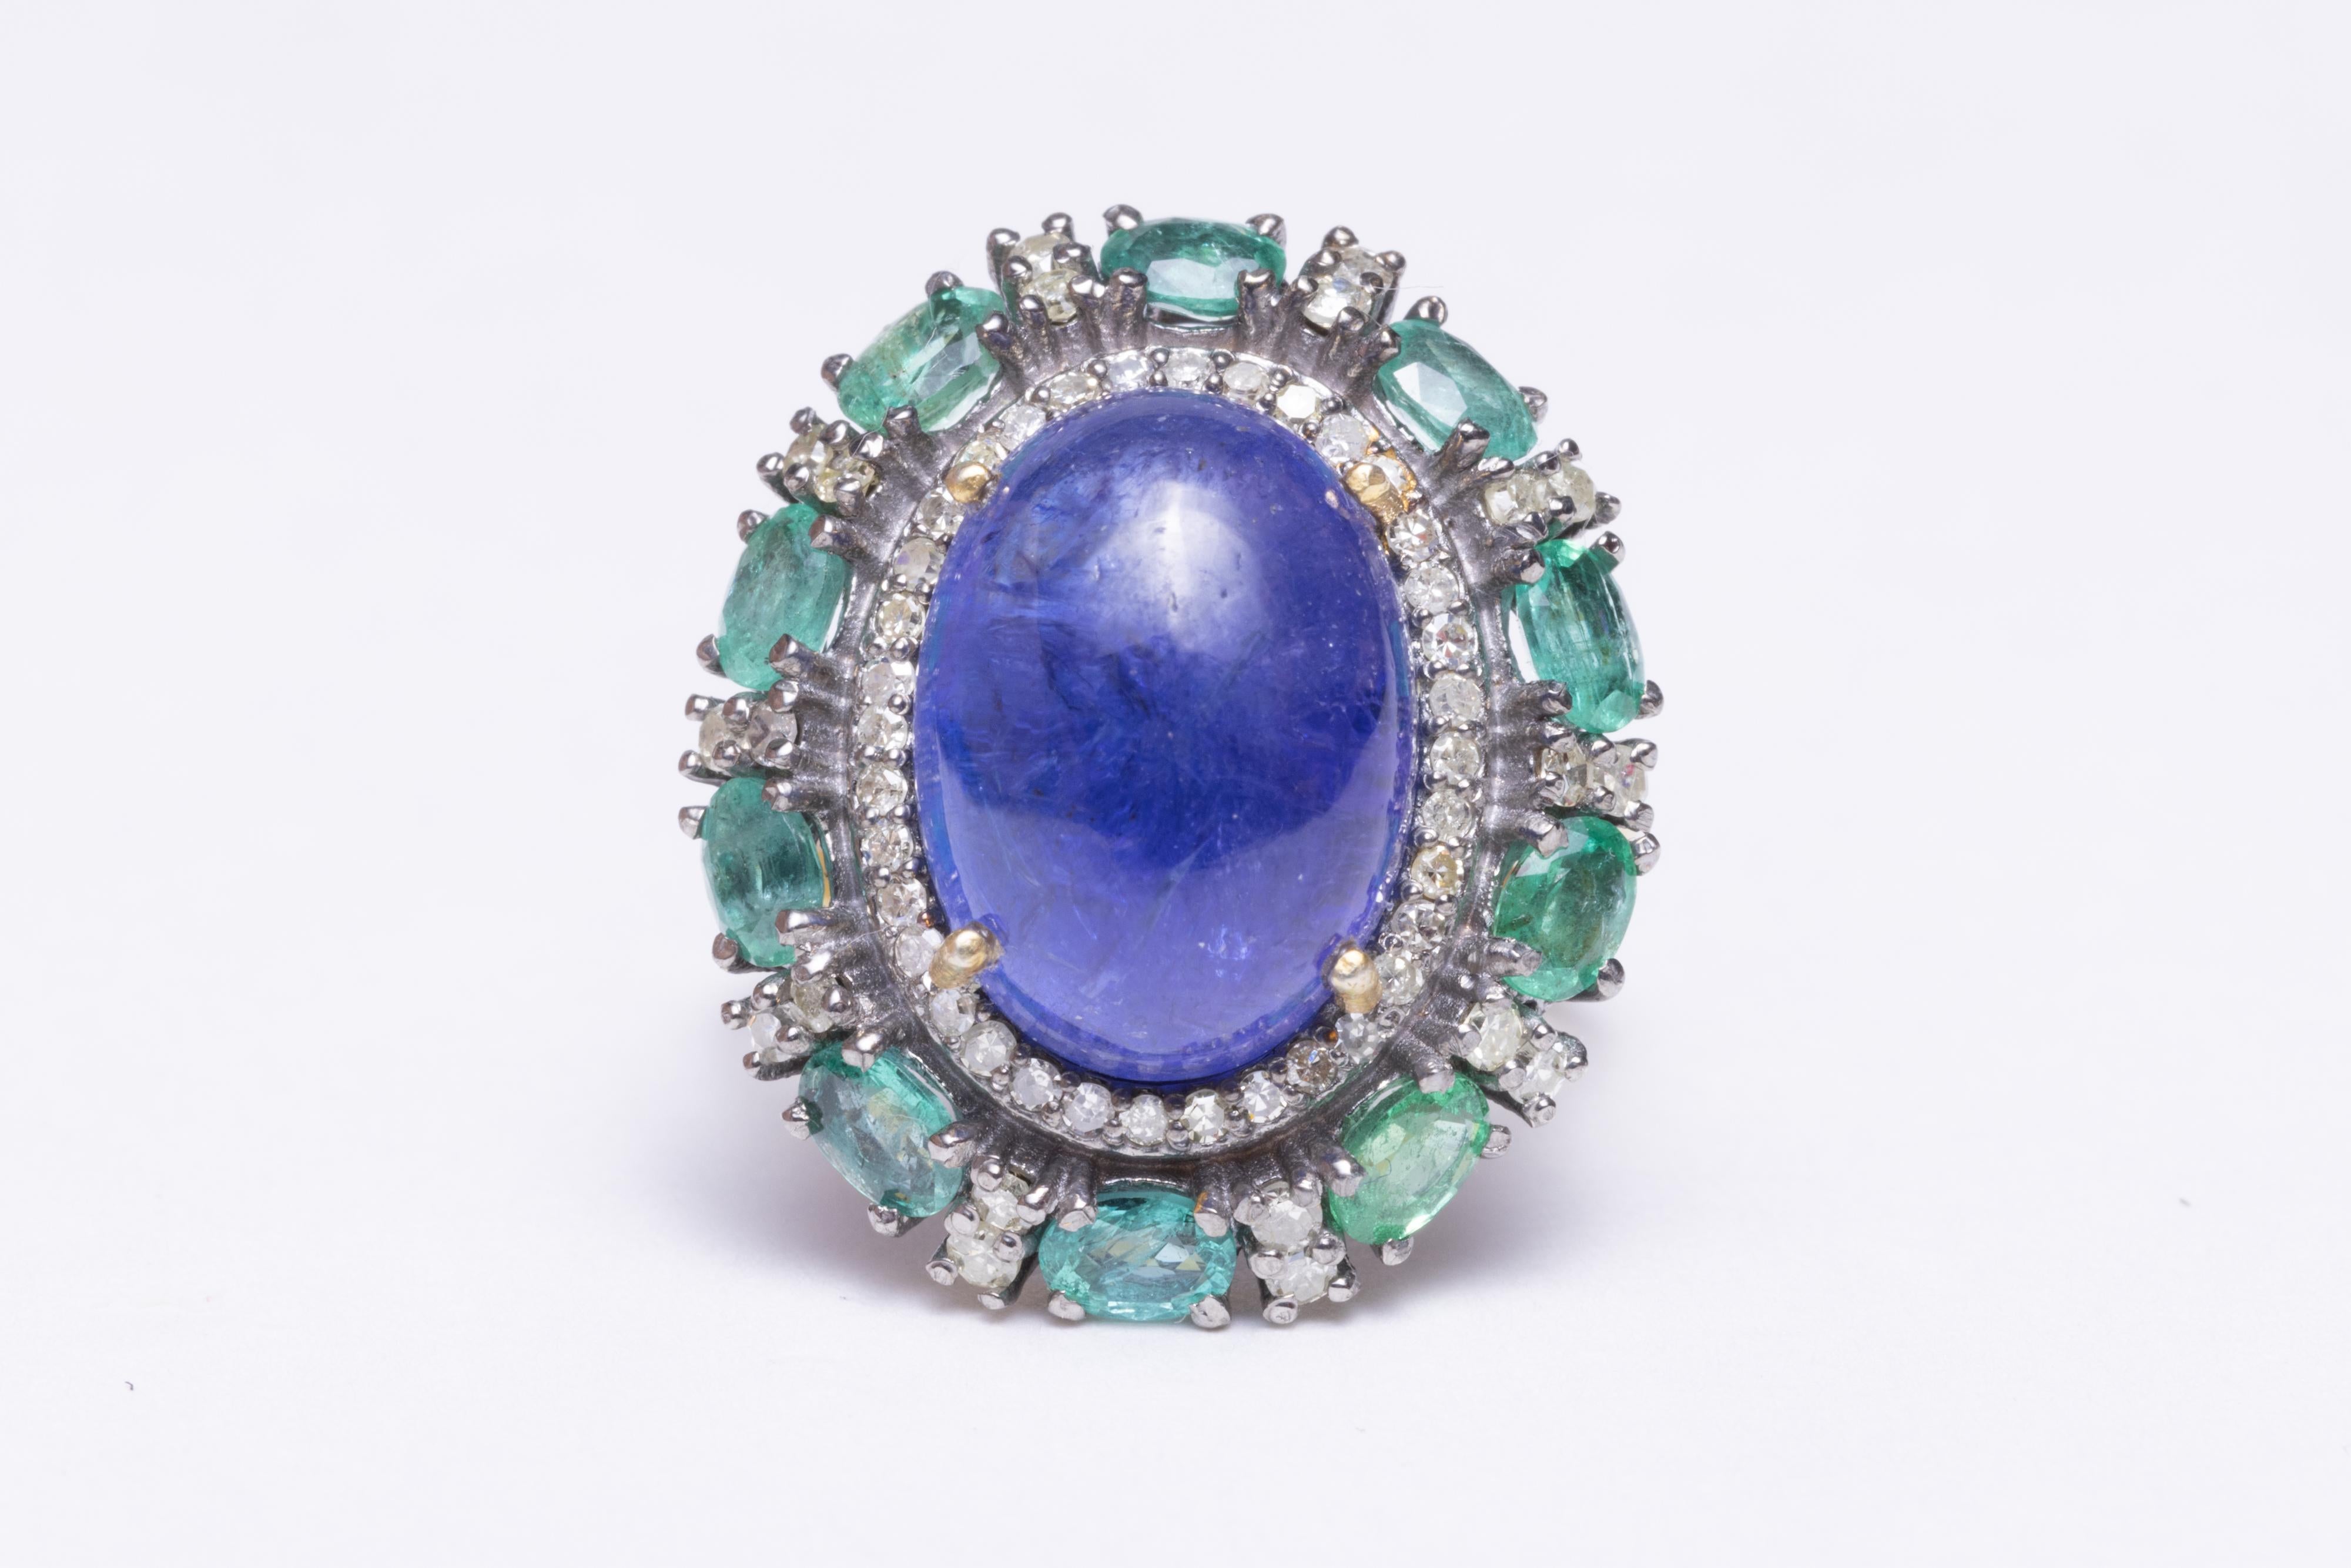 Large cabochon domed Tanzanite center stone surrounded by oval-shaped faceted emeralds and round, brilliant cut diamonds, set in sterling silver with a vermeil band.  Ring size is 6.5